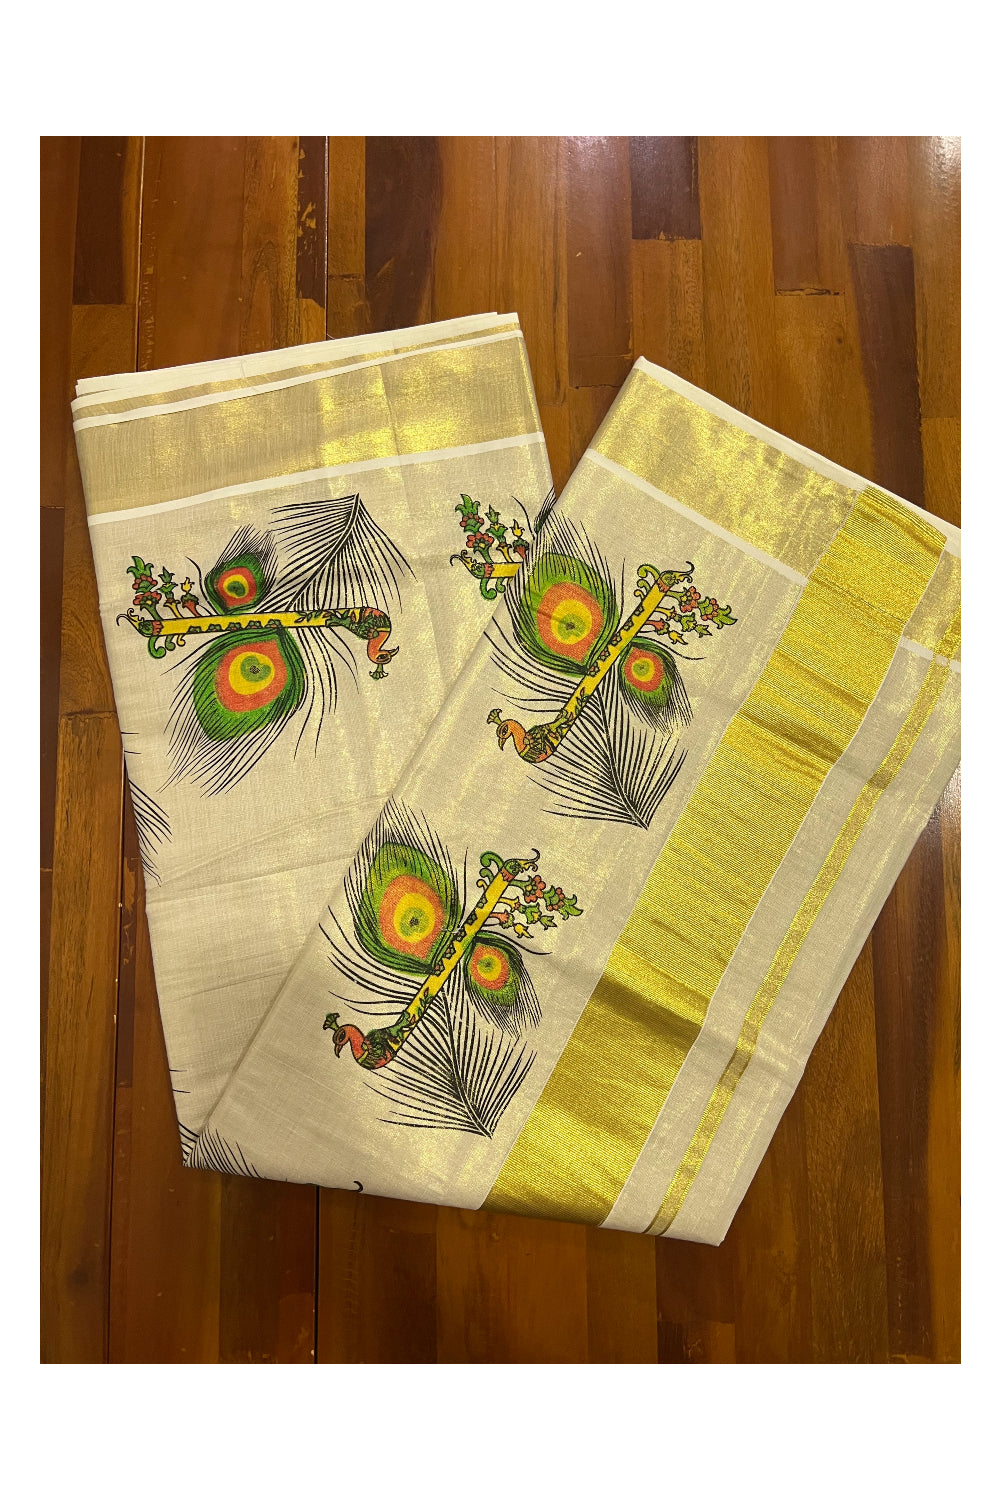 Kerala Tissue Kasavu Saree With Mural Printed Feather and Flute Design